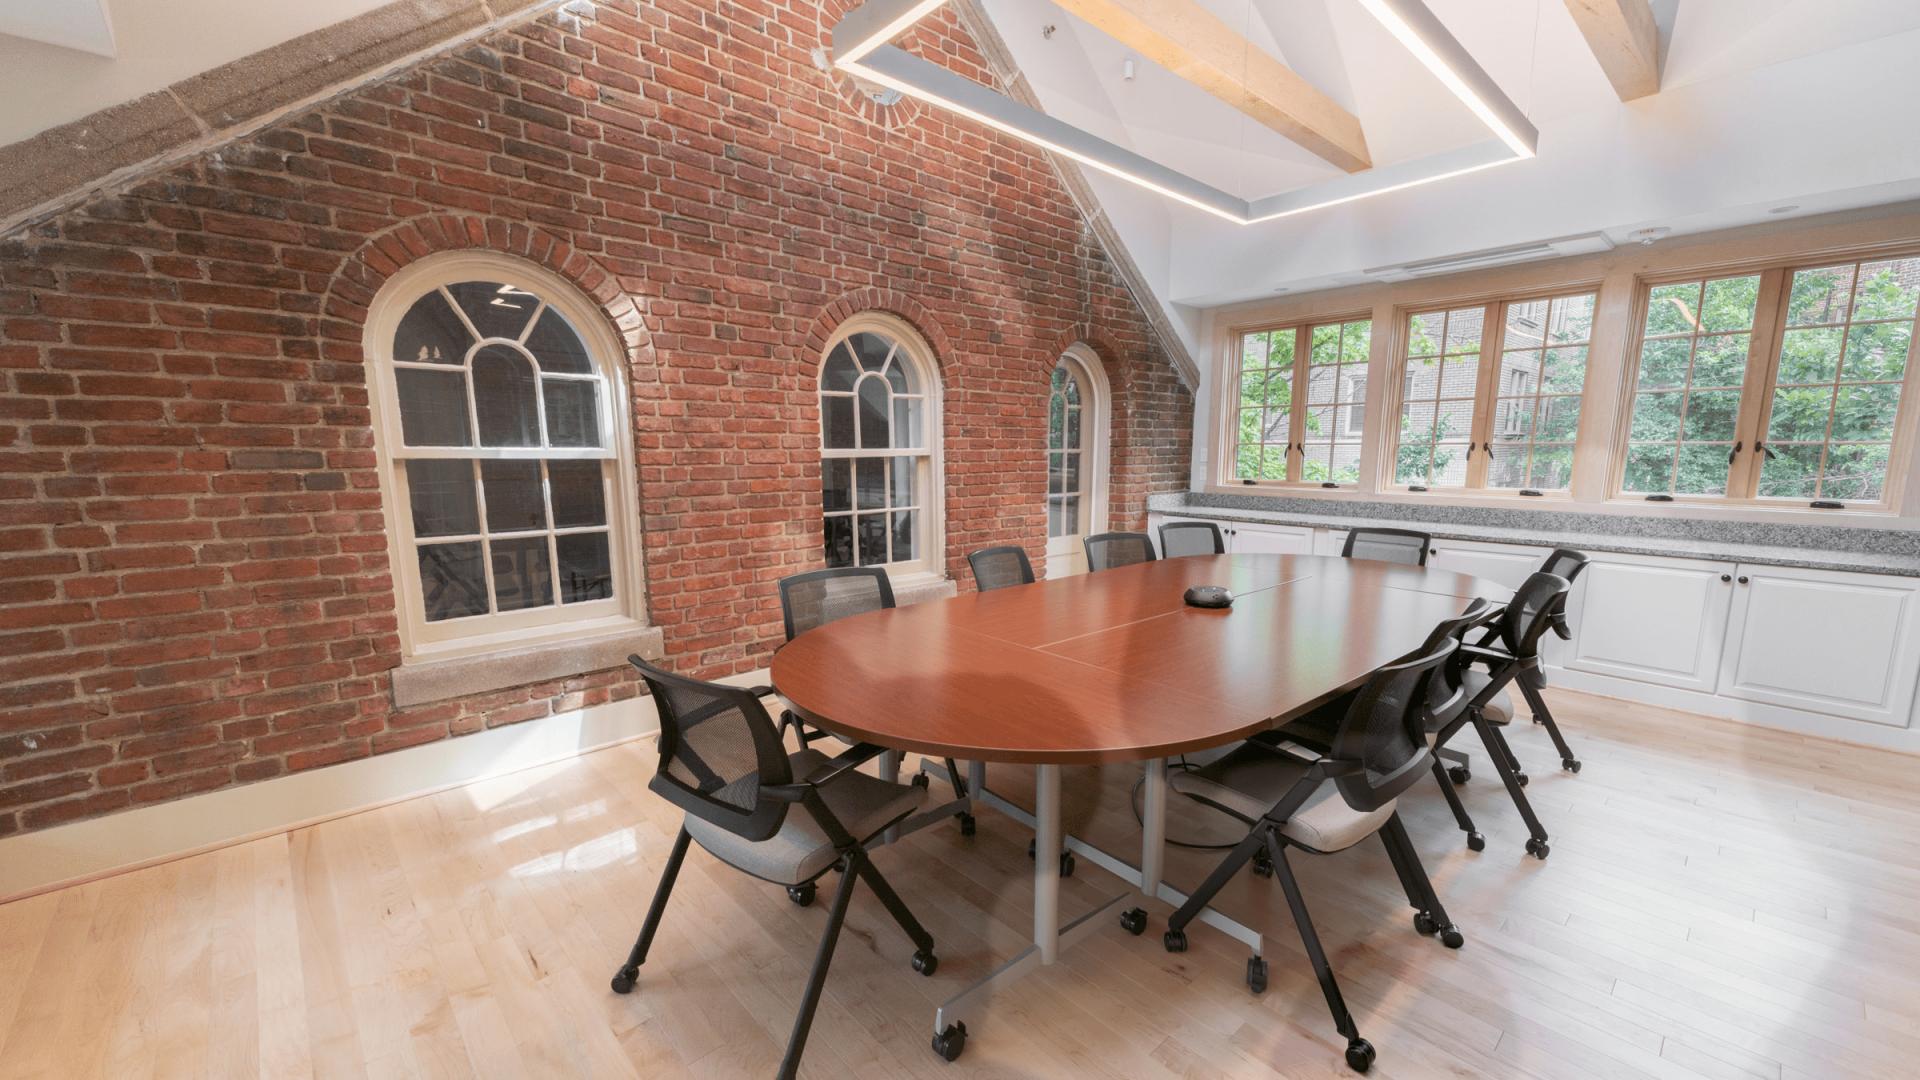 Offsite Meeting Rooms for Rent in Washington, DC